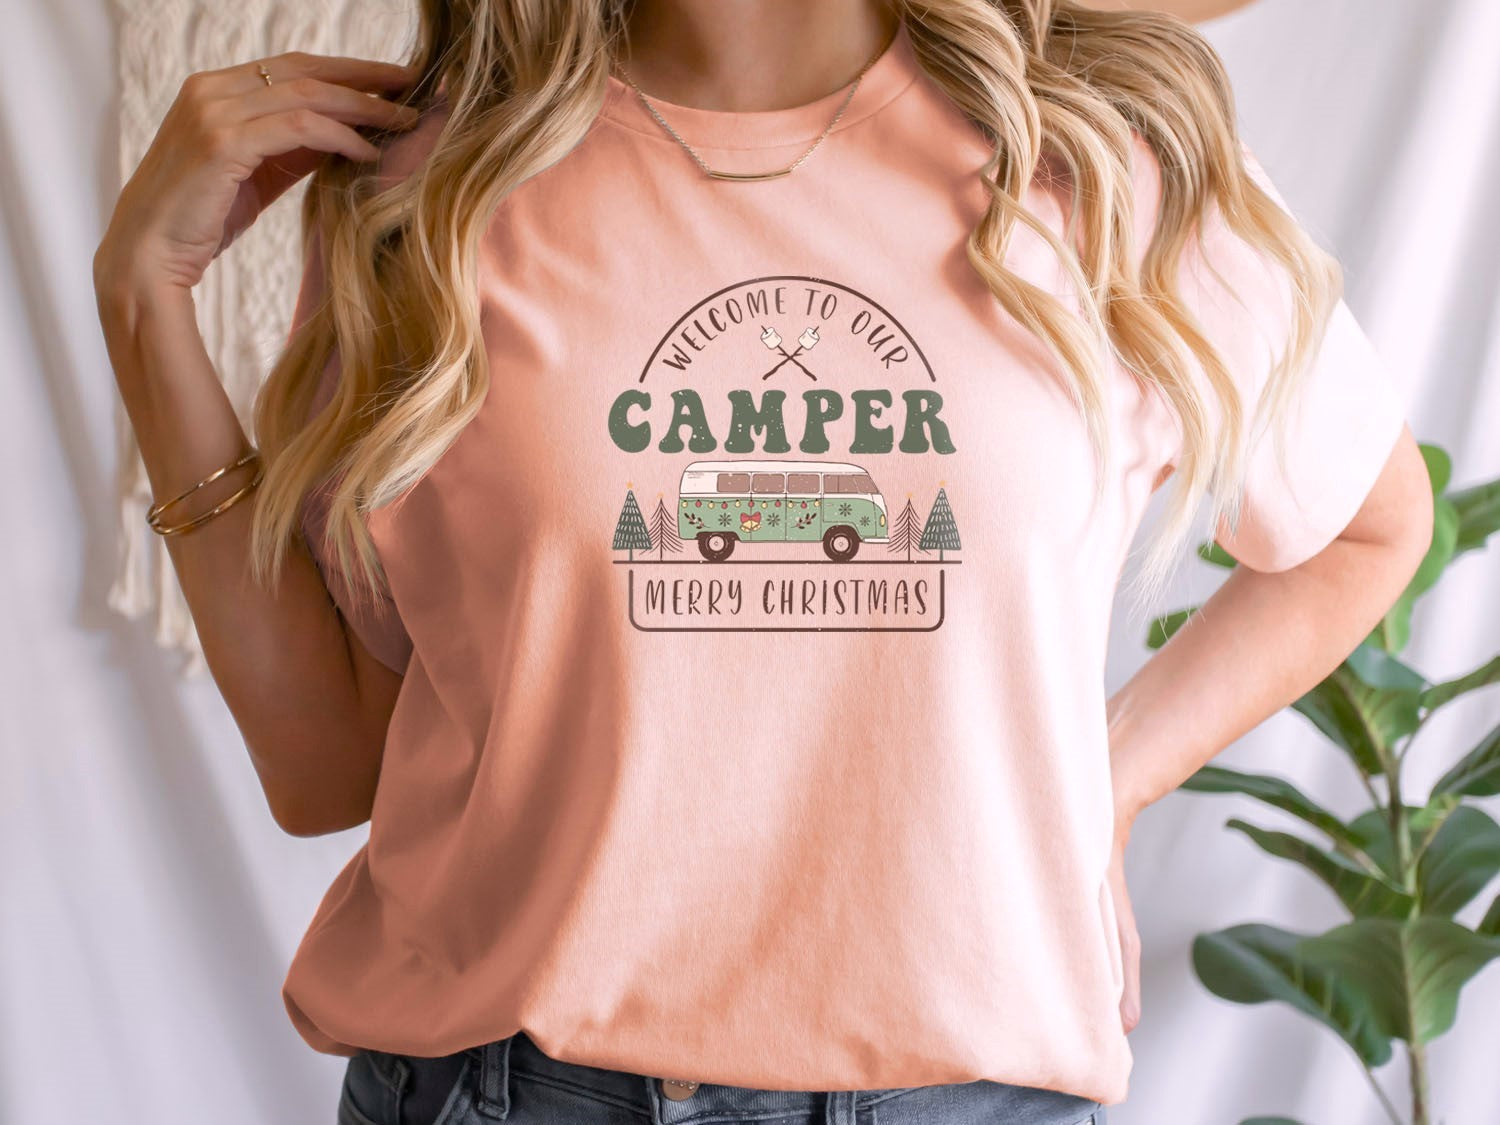 Welcome To Our Camper Van Merry Christmas T-shirt - Christmas Winter Retro Vintage Design Printed Tee Shirt